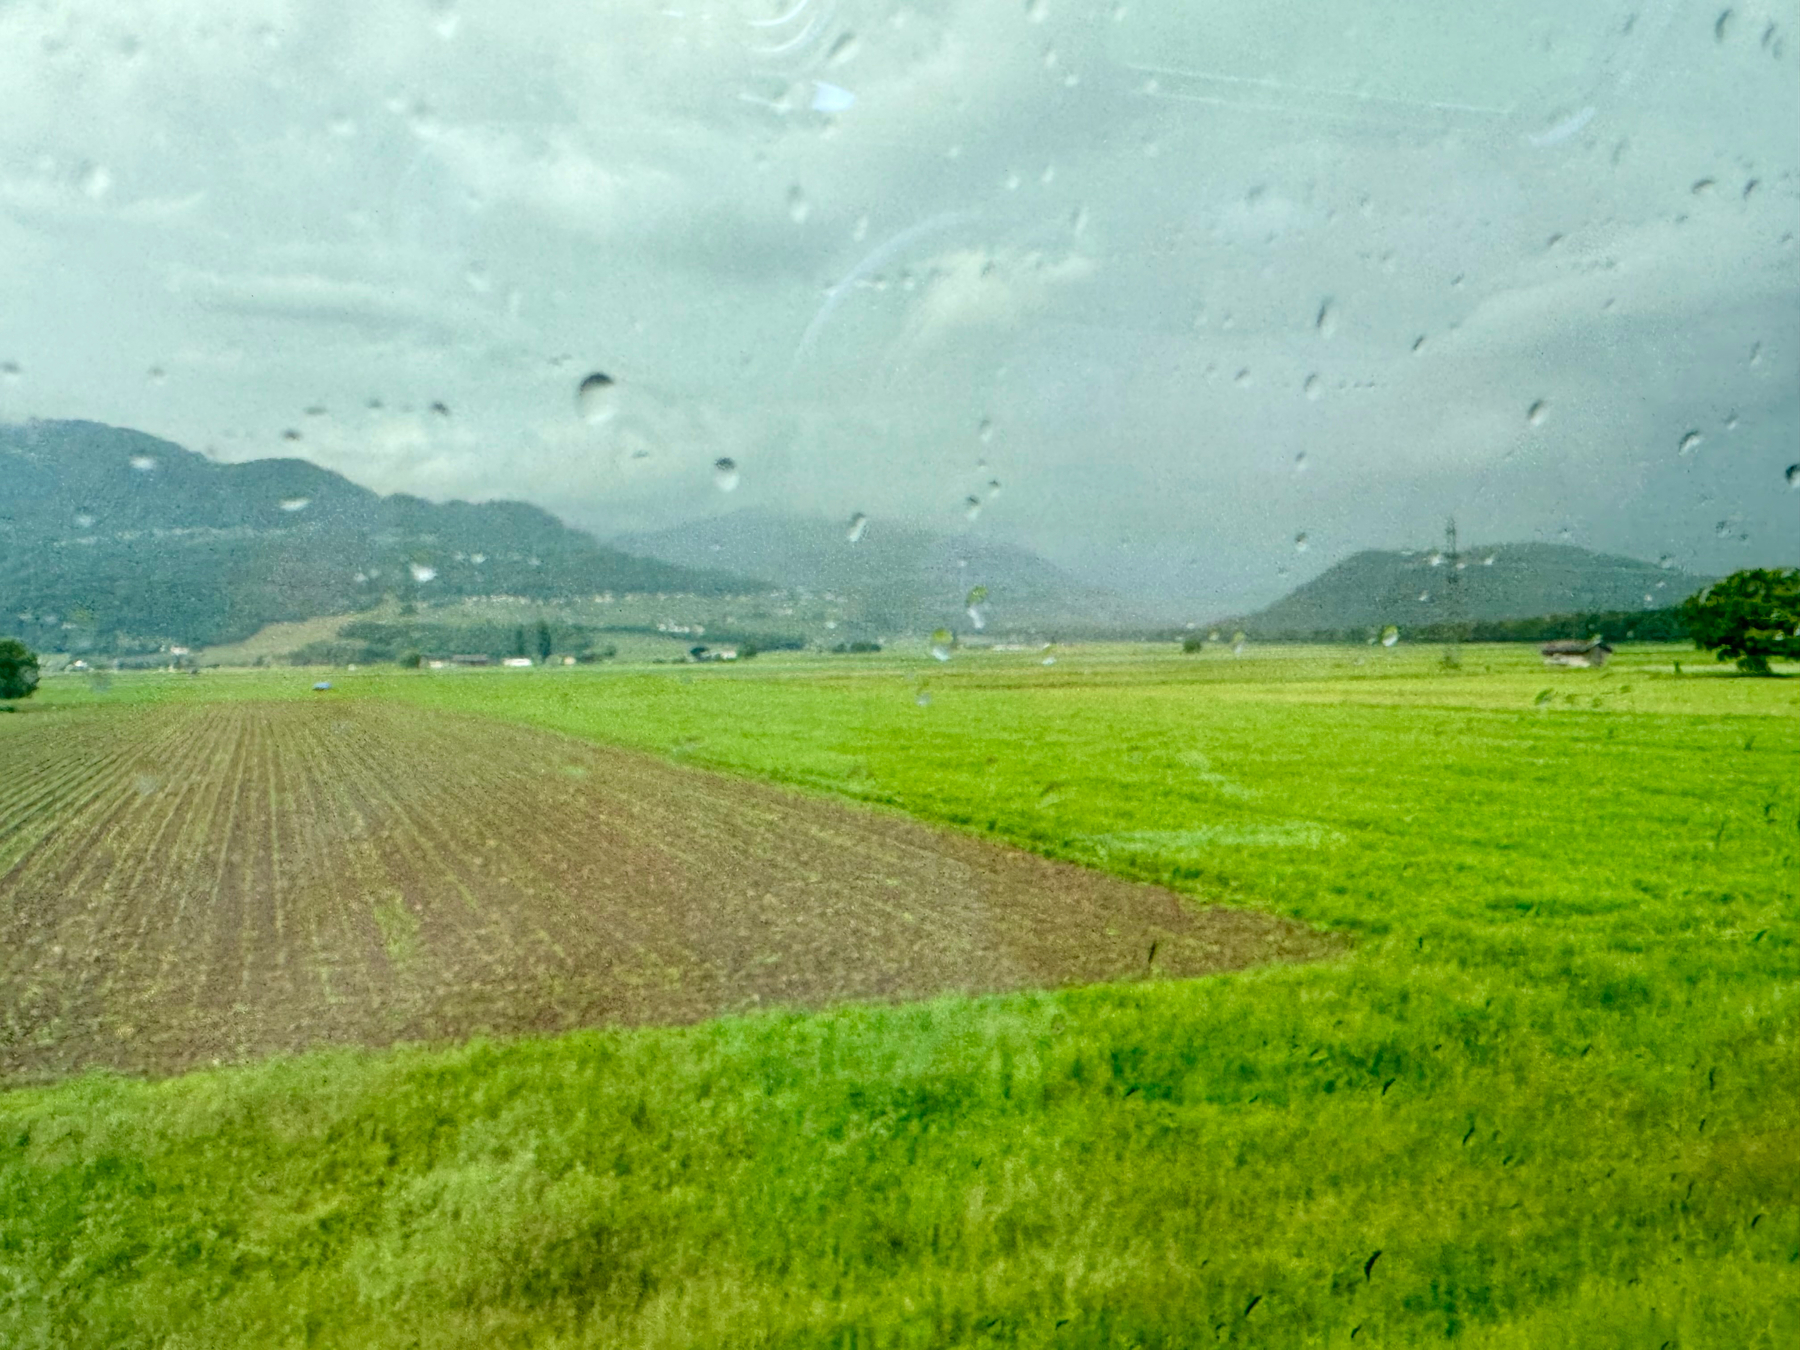 A scenic view of agricultural fields under a cloudy sky, with raindrops visible on the surface from which the photo is taken, suggesting it was shot through a window.